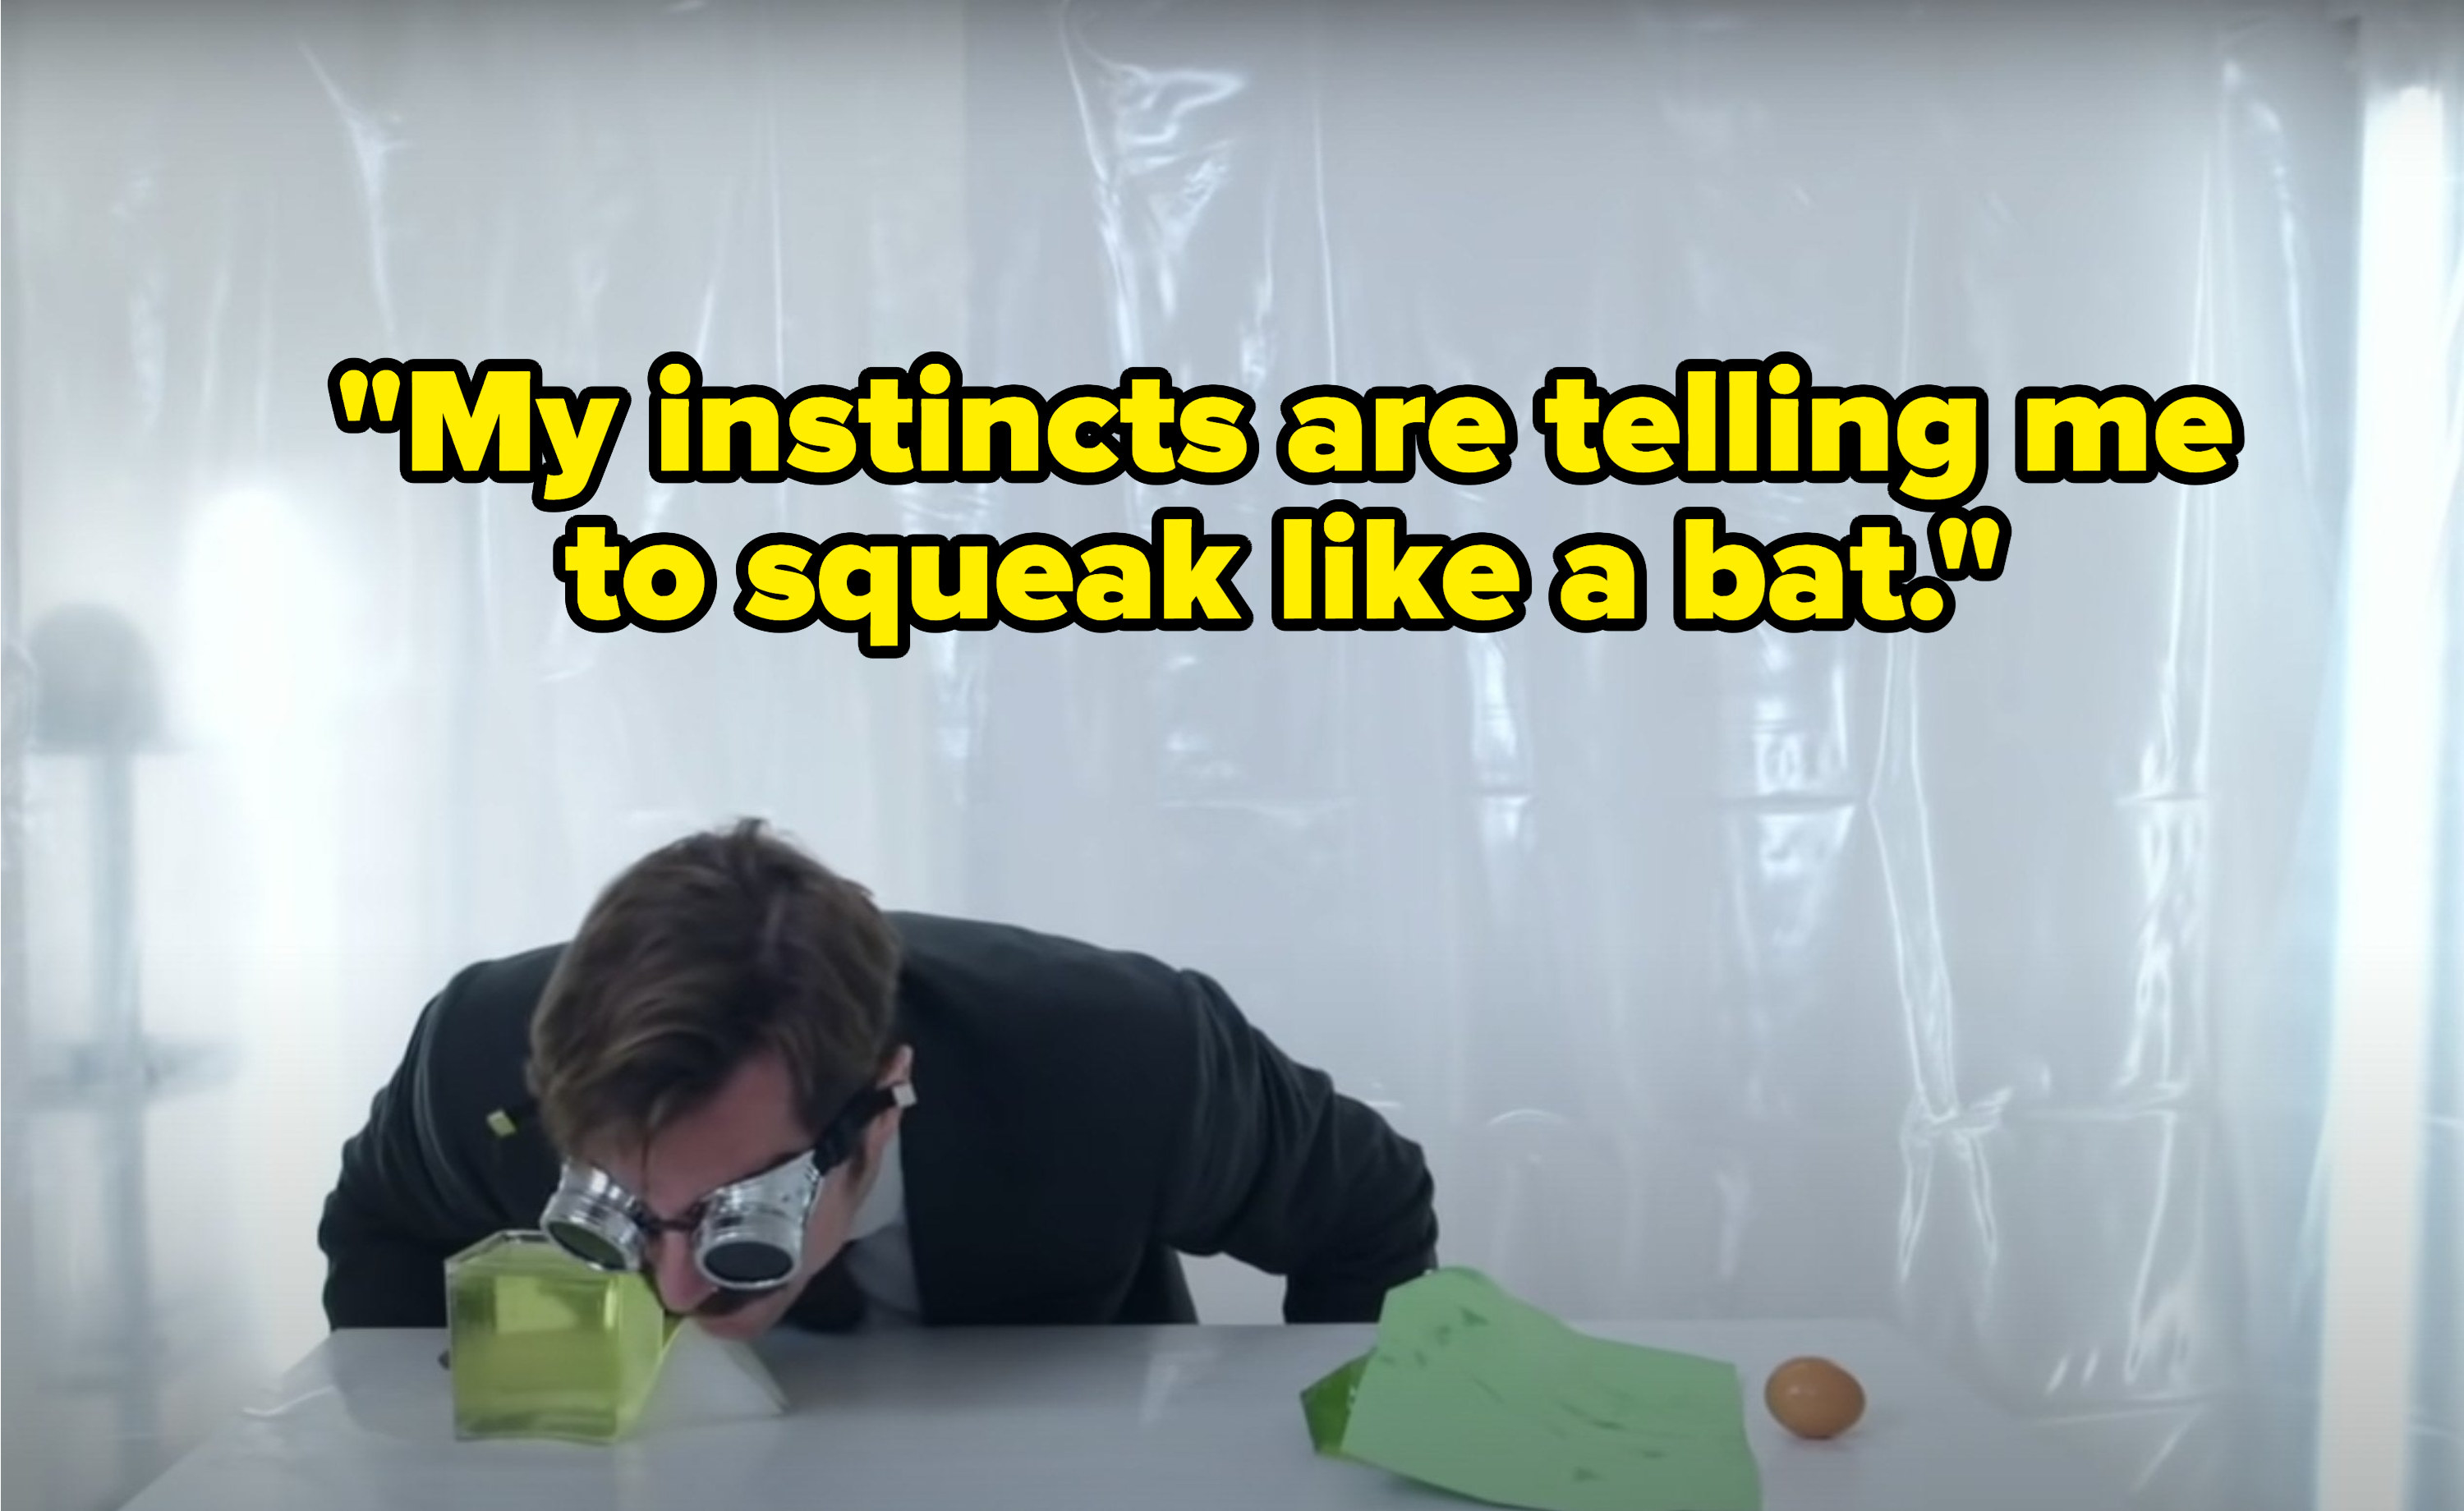 Mike Wozniak says, My instincts are telling me to squeak like a bat